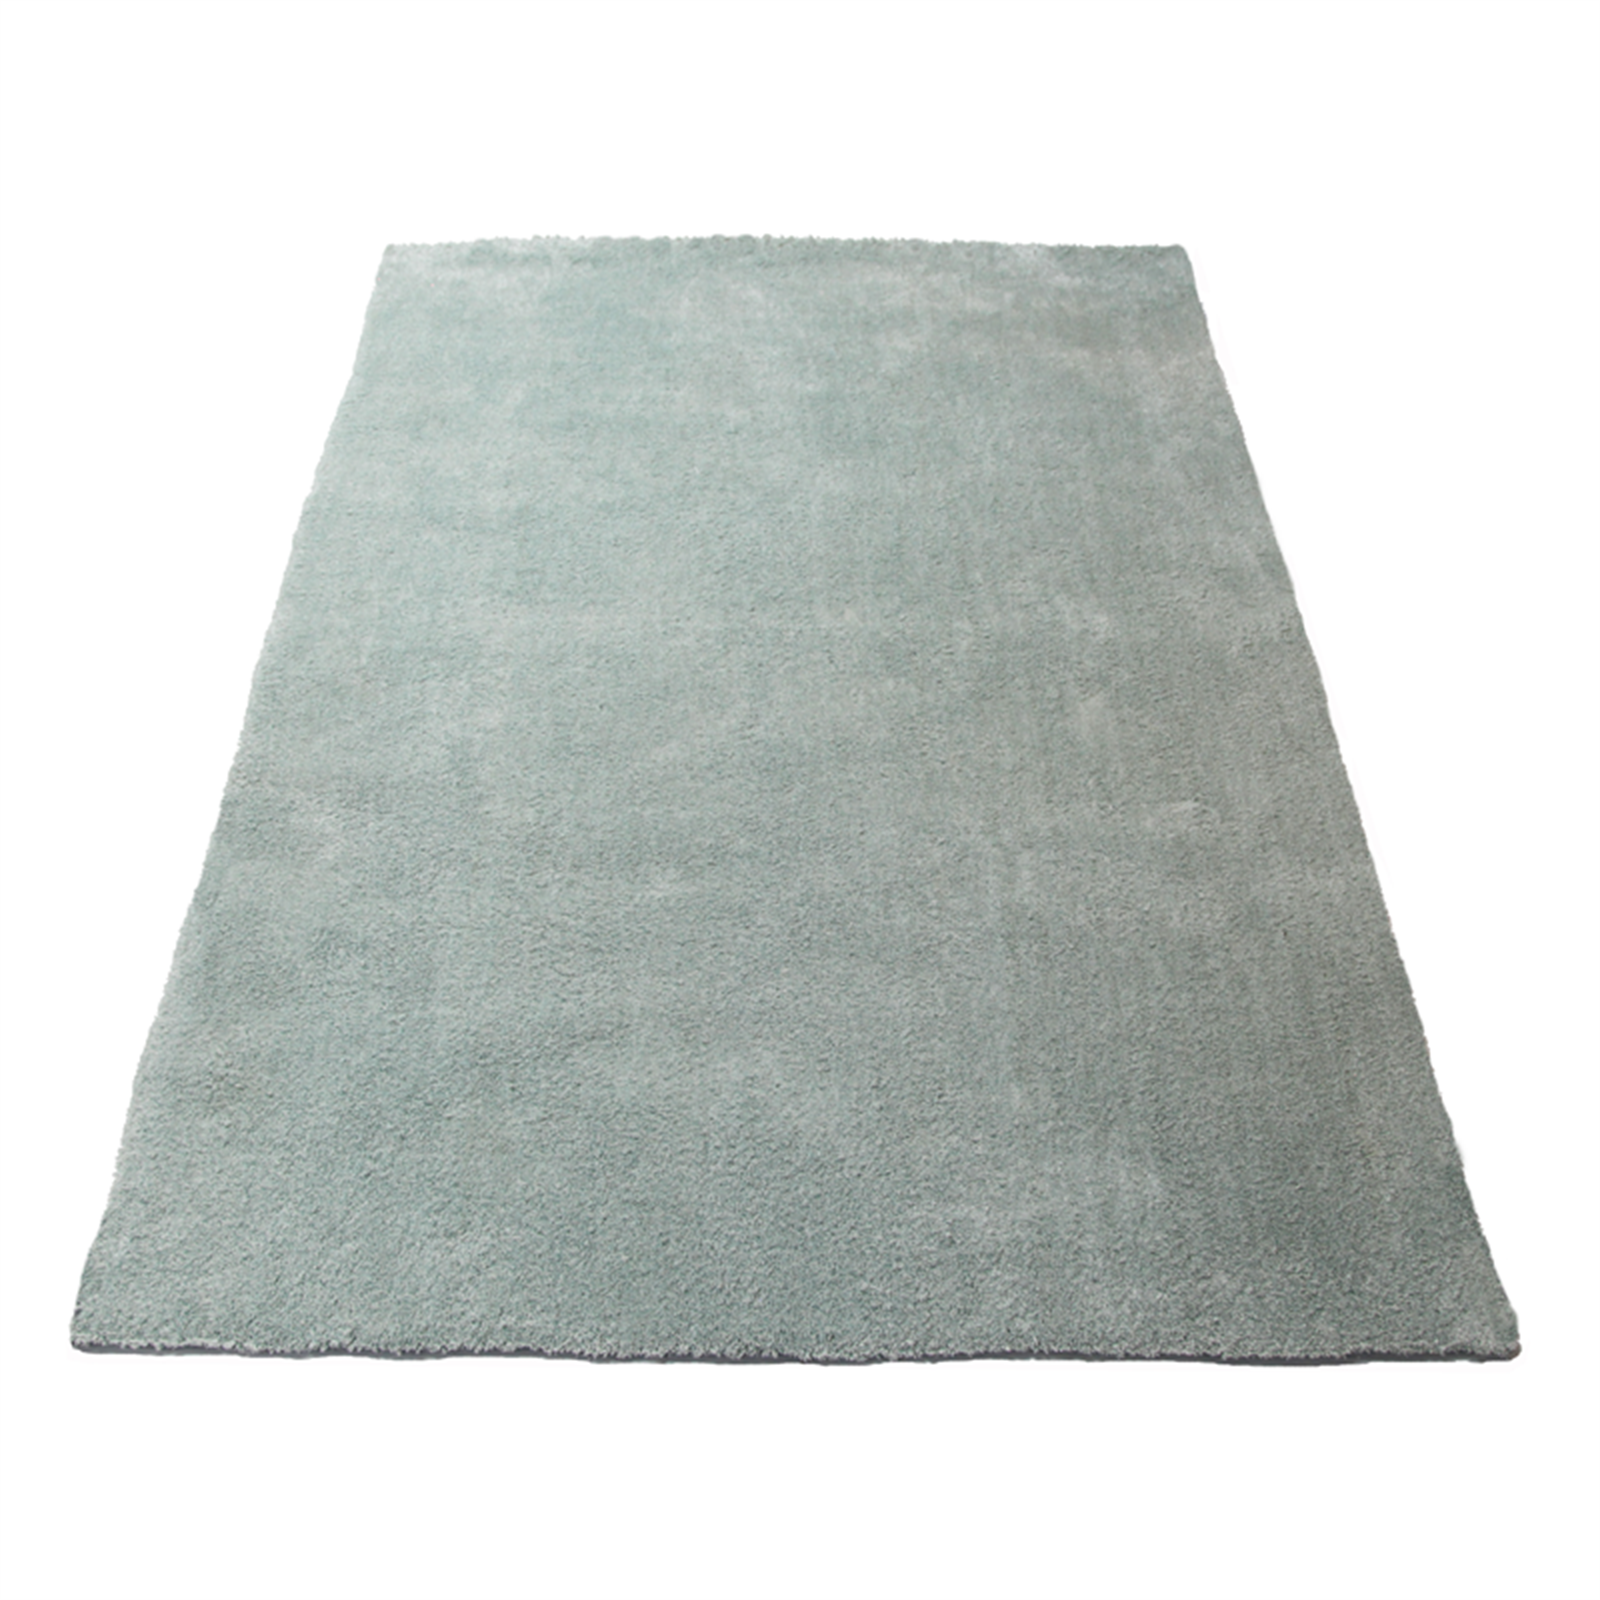 The Estate Collection 160 x 230cm Mint Berlin Rug